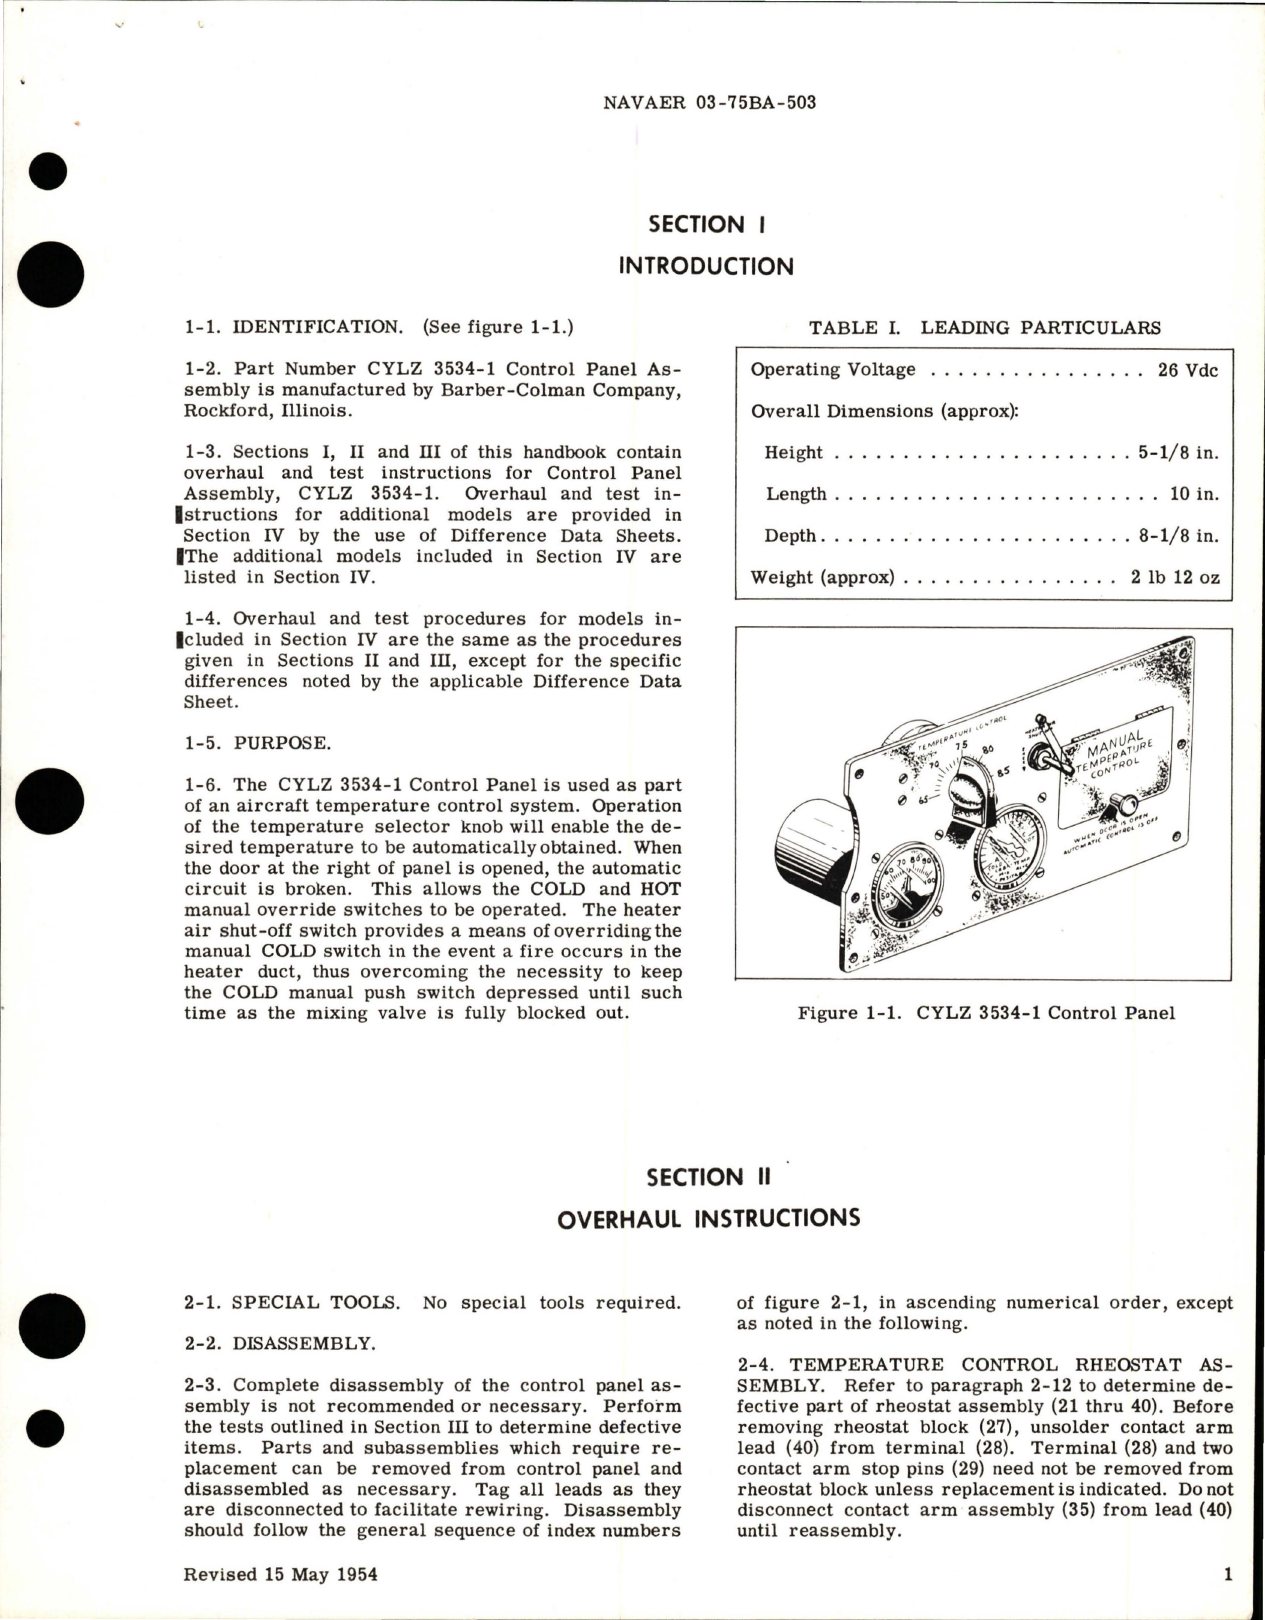 Sample page 5 from AirCorps Library document: Overhaul Instructions for Aircraft Temperature Control System Control Panel - Part CYLZ 3534-1 and CYLZ 3734-1